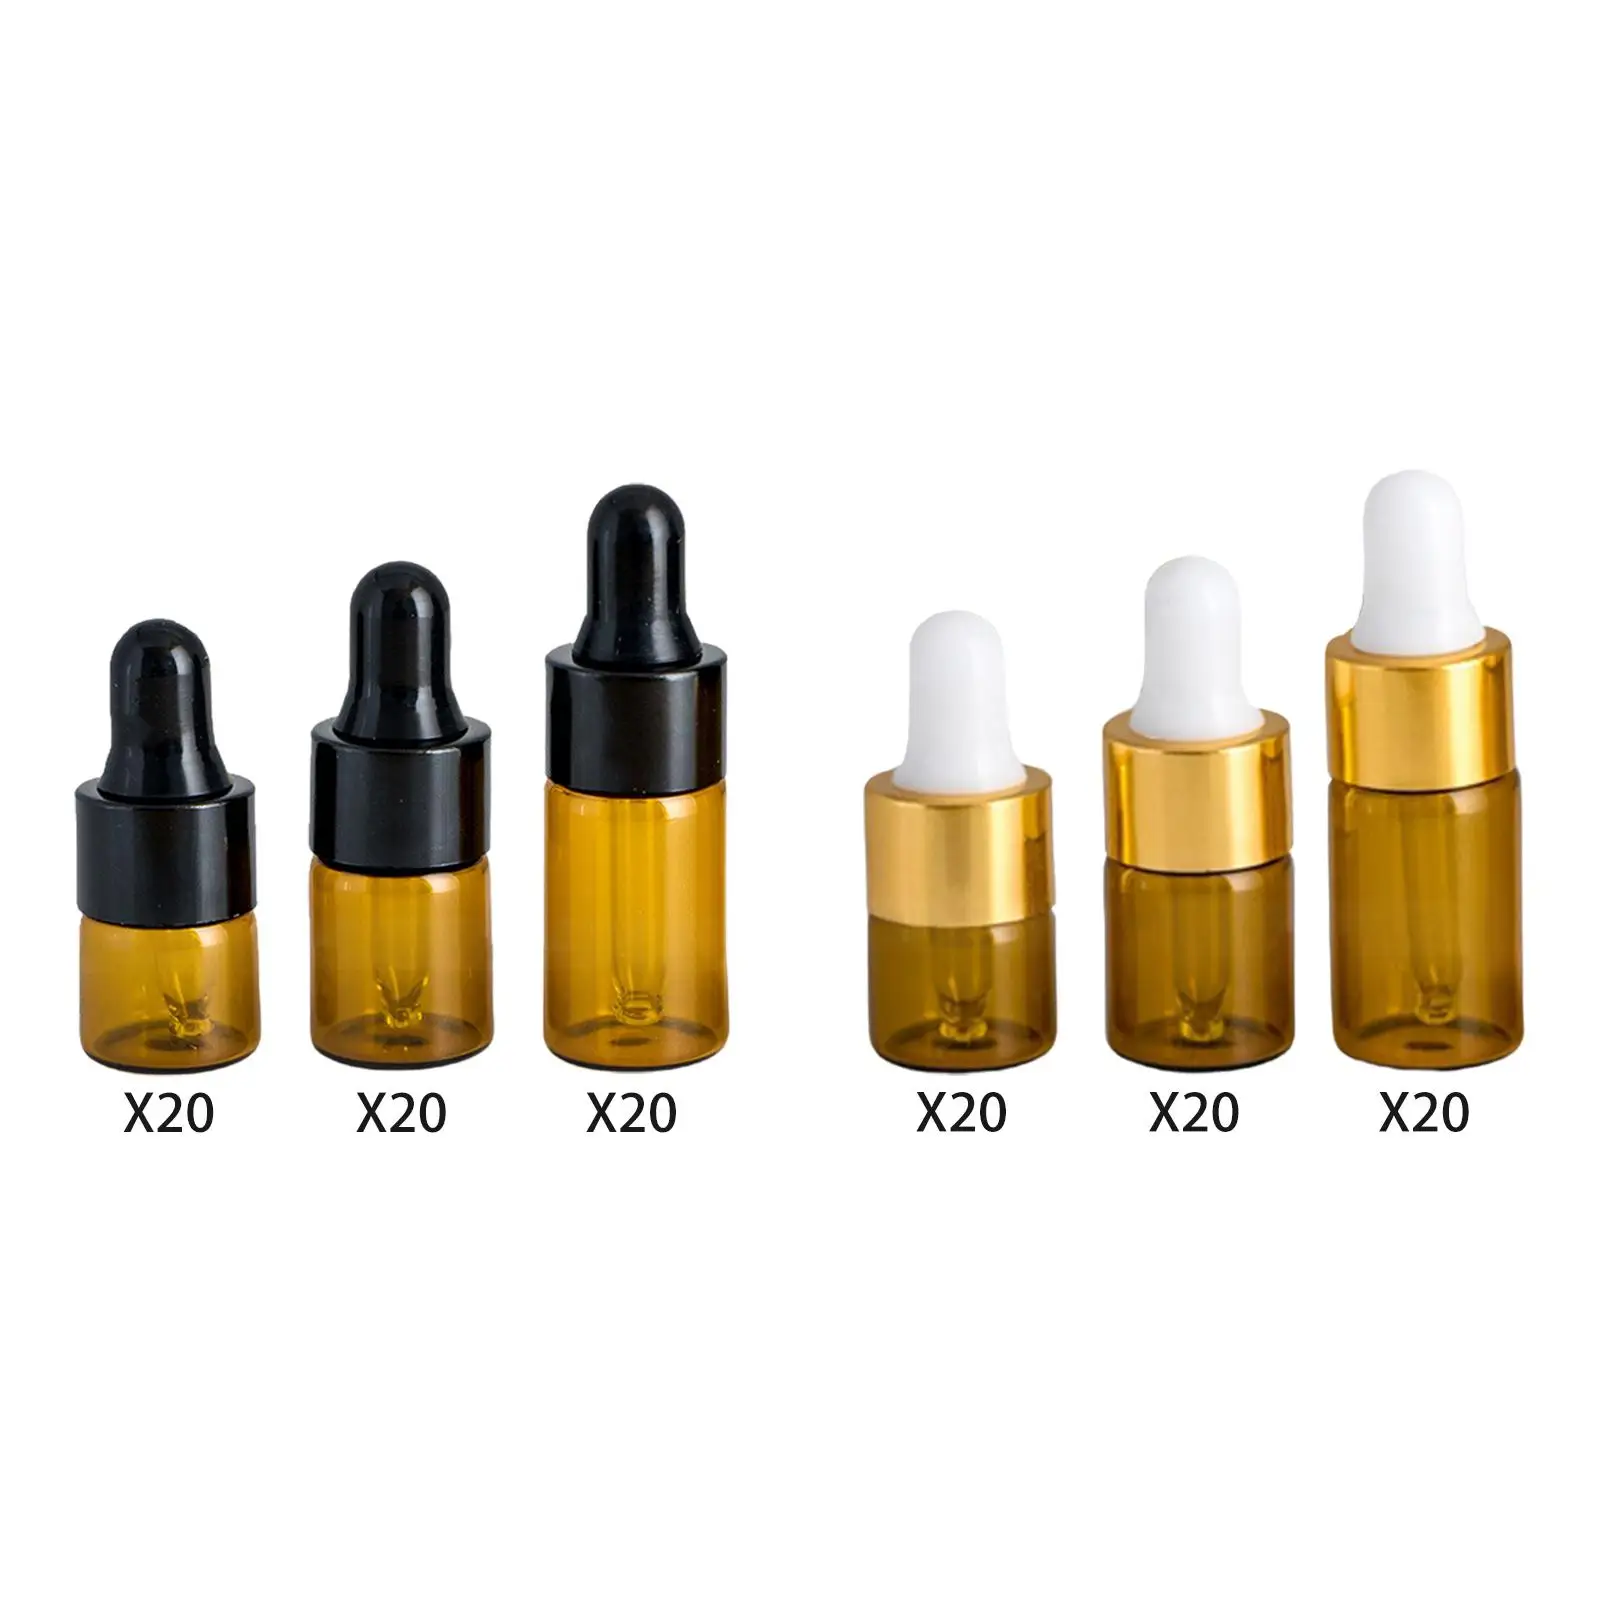 Small Dropper Bottles with Glass Eye Dropper Leakproof Sample Vial Portable Essential Oil Bottle for Essential Oils Body Oils